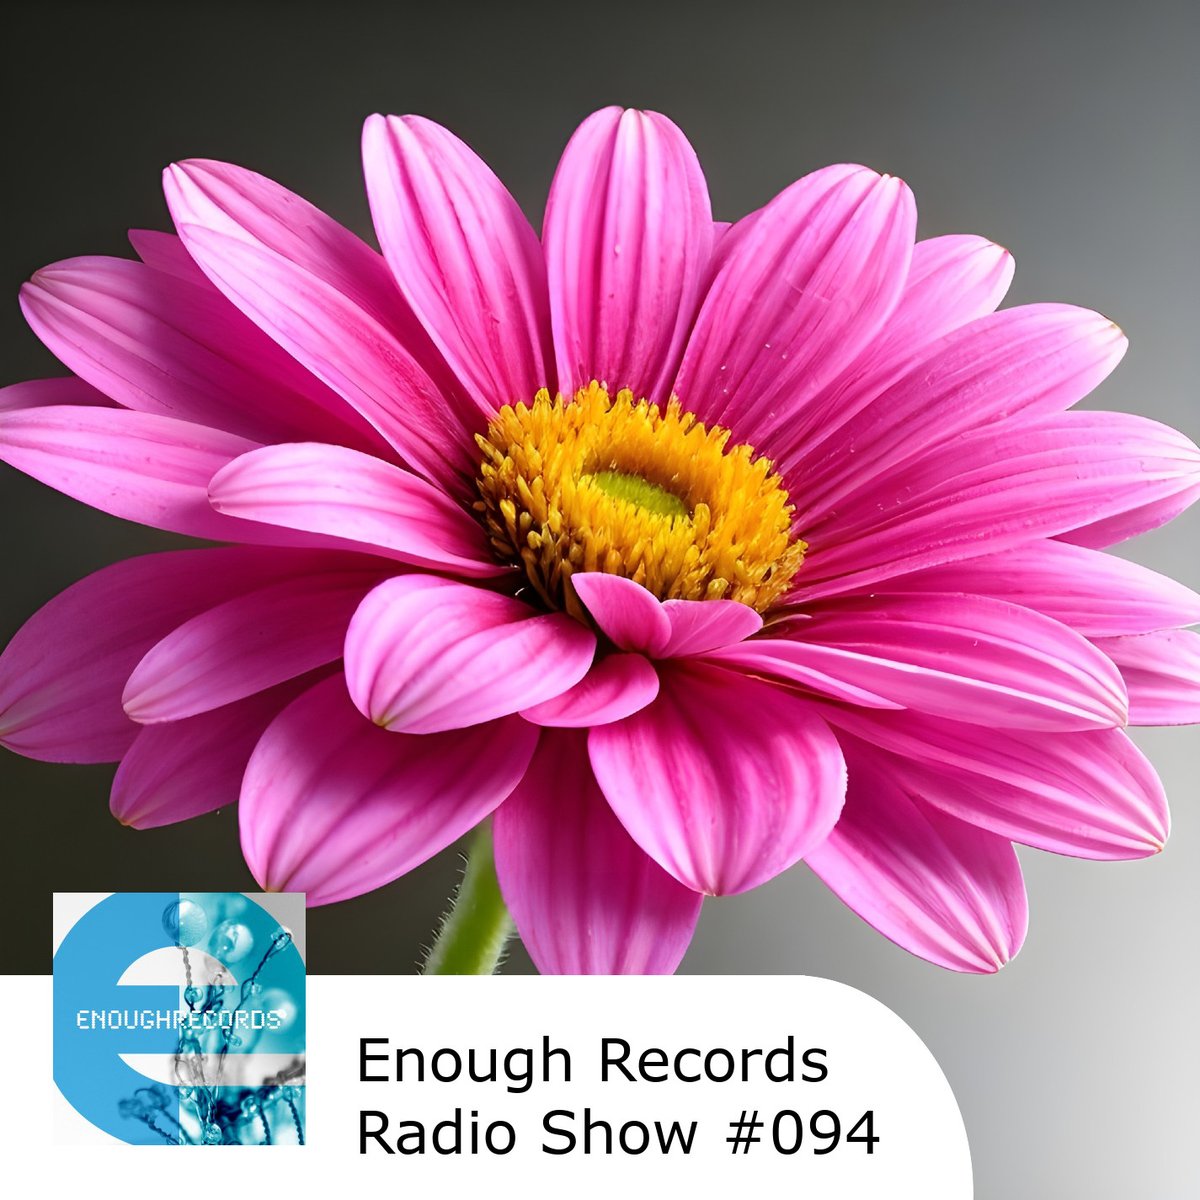 Released today another episode of the Enough Records Radio Show. This month focusing on our releases from 2006. Lend me your ears: mixcloud.com/enoughrecords/… #netaudio #ccmusic #radioshow #podcast